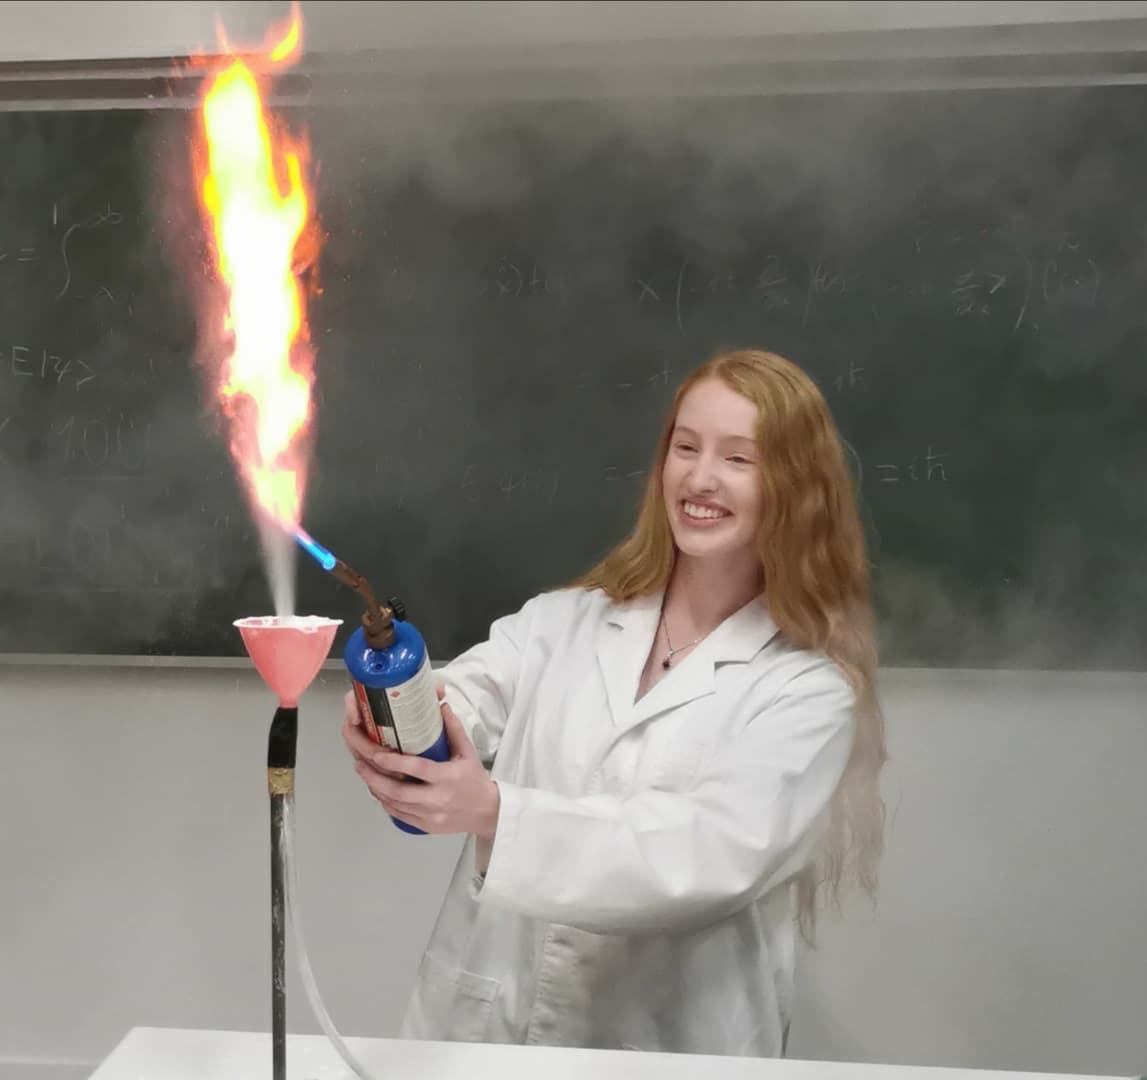 Science undergraduate, Emerald Gaydon, demonstrating a fire science experiment in front of a blackboard.